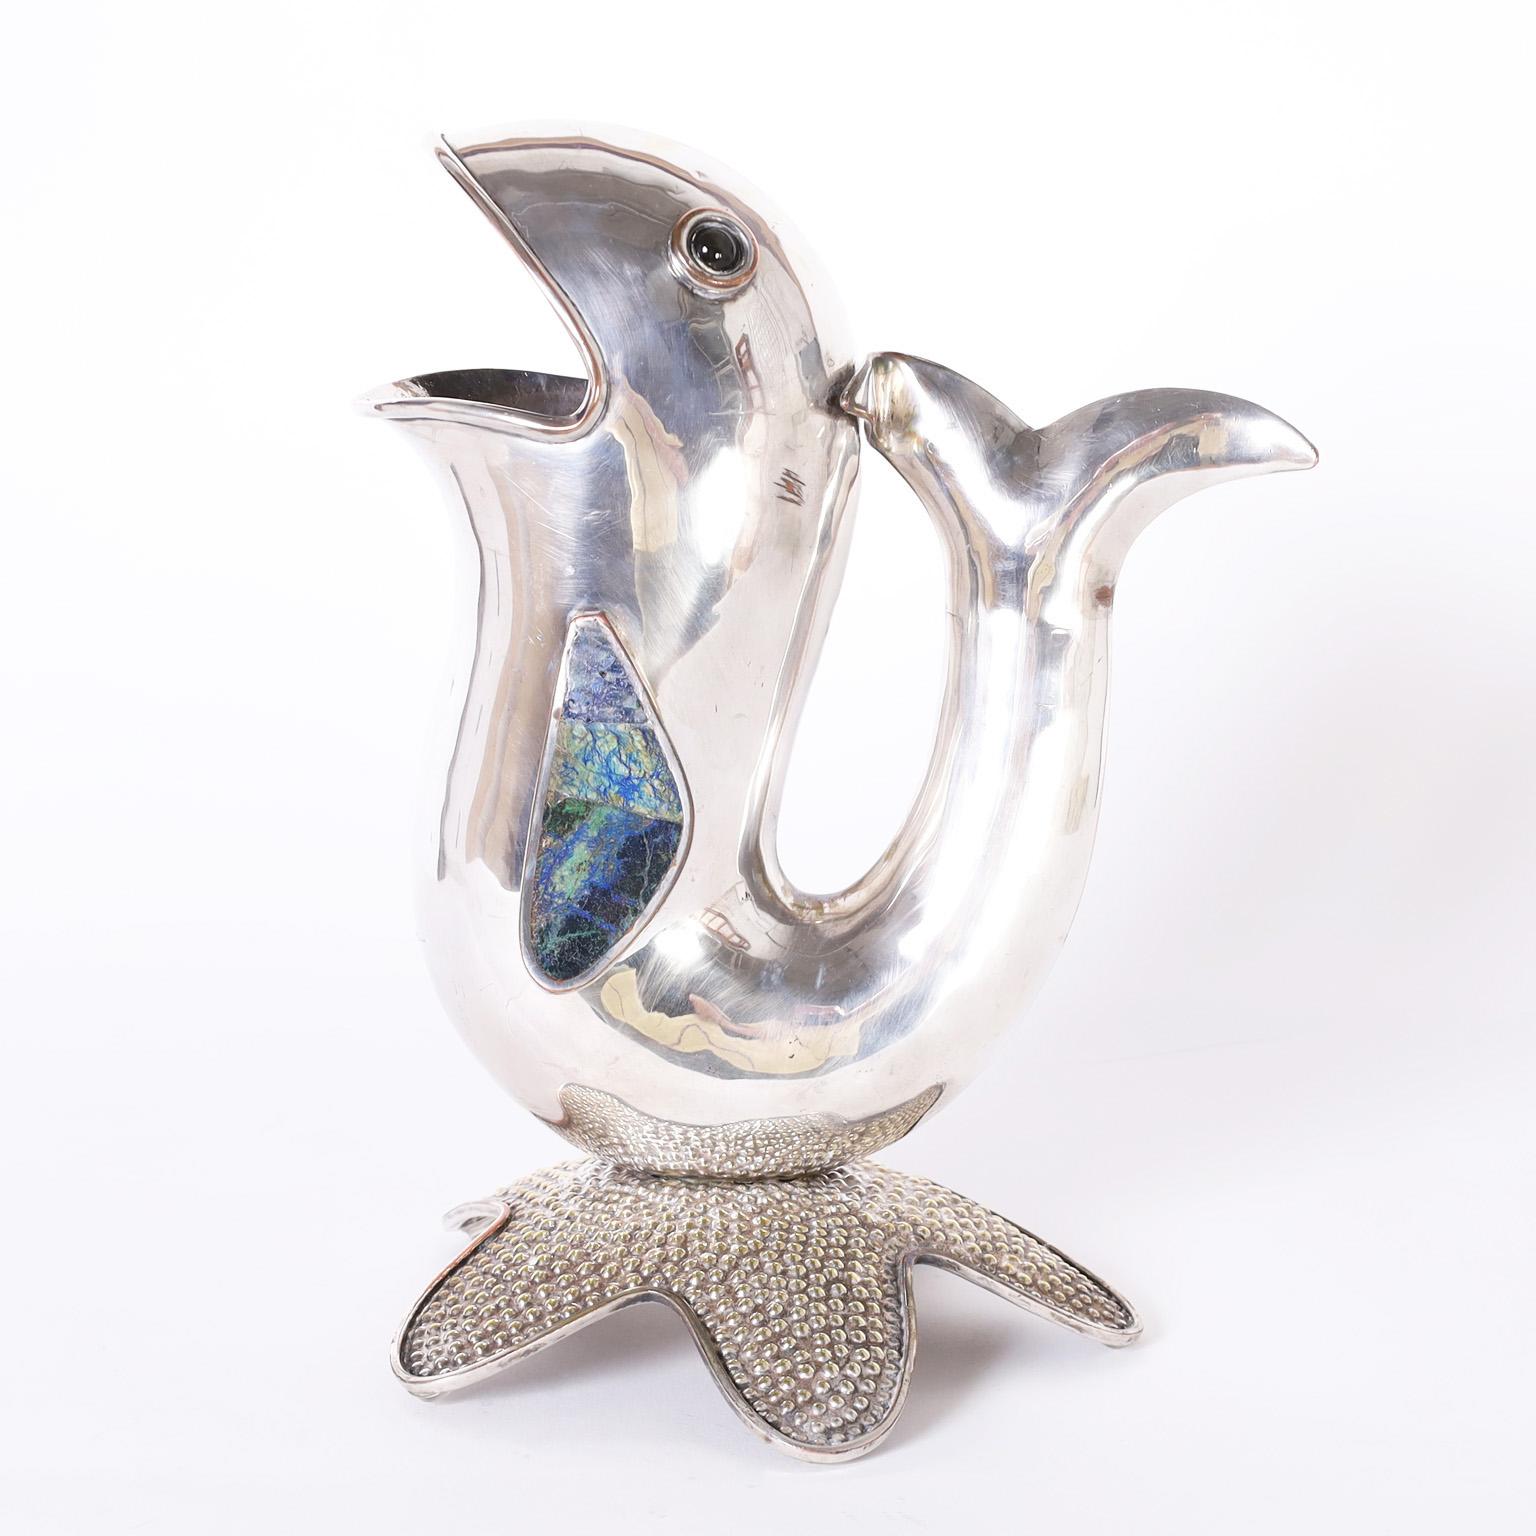 Whimsical mid-century silver plate on copper fish form water pitcher crafted by a master silversmith with stone eyes and fins on a starfish base. Signed Los Castillo Mexico on the bottom.